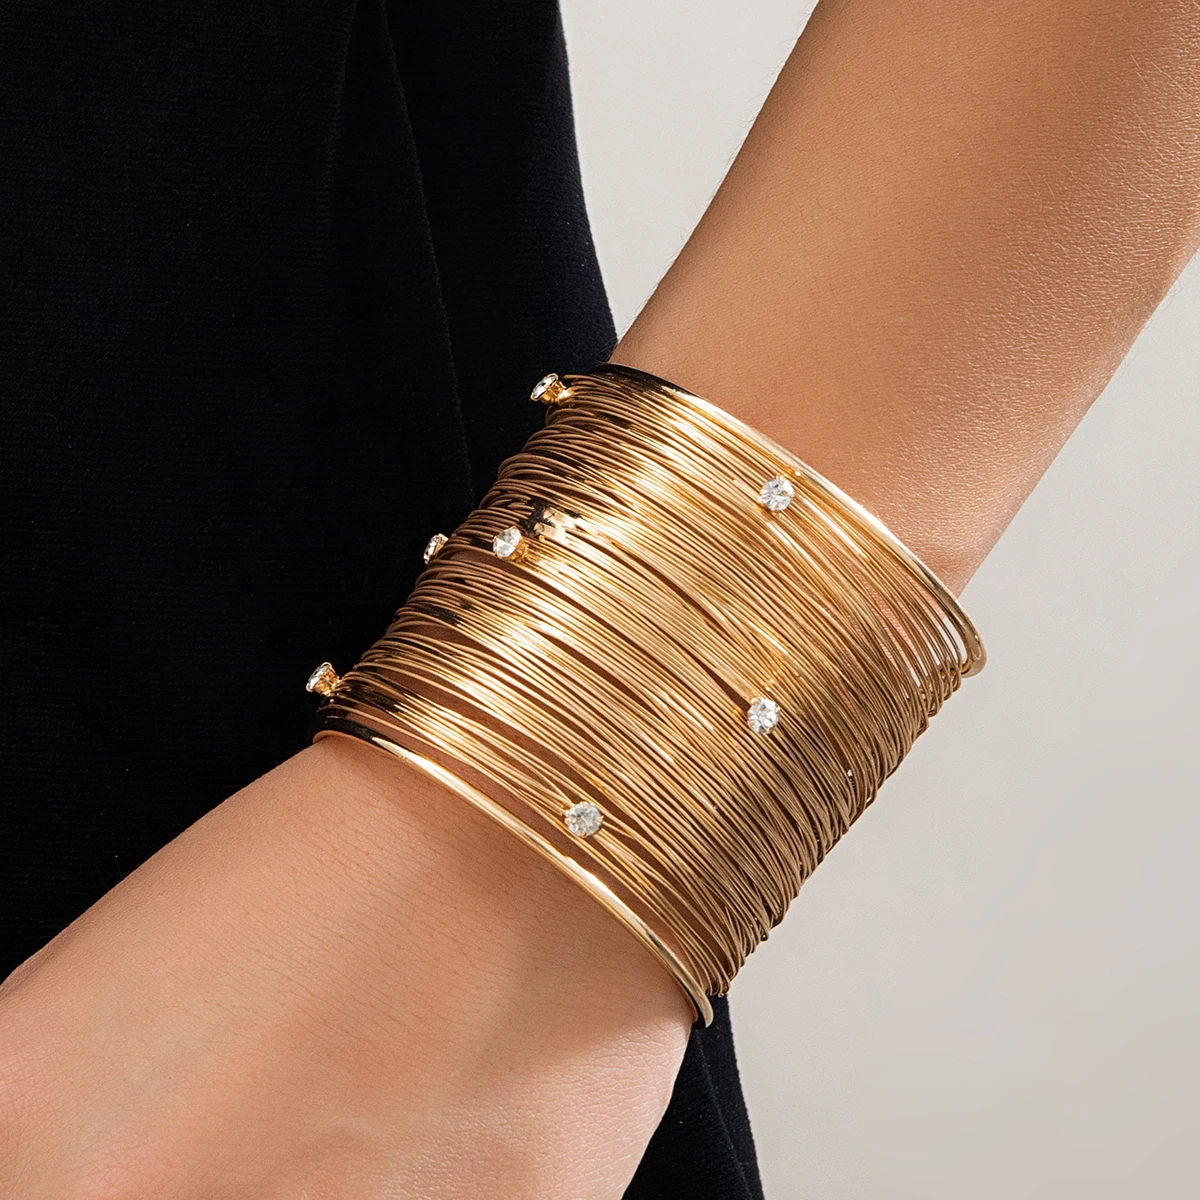 

Multilayer Metal Wires Strings Open Cuff Bangles for Women Exaggerated Punk Rhinestone Arm Bracelet Grunge Jewelry Steampunk Men